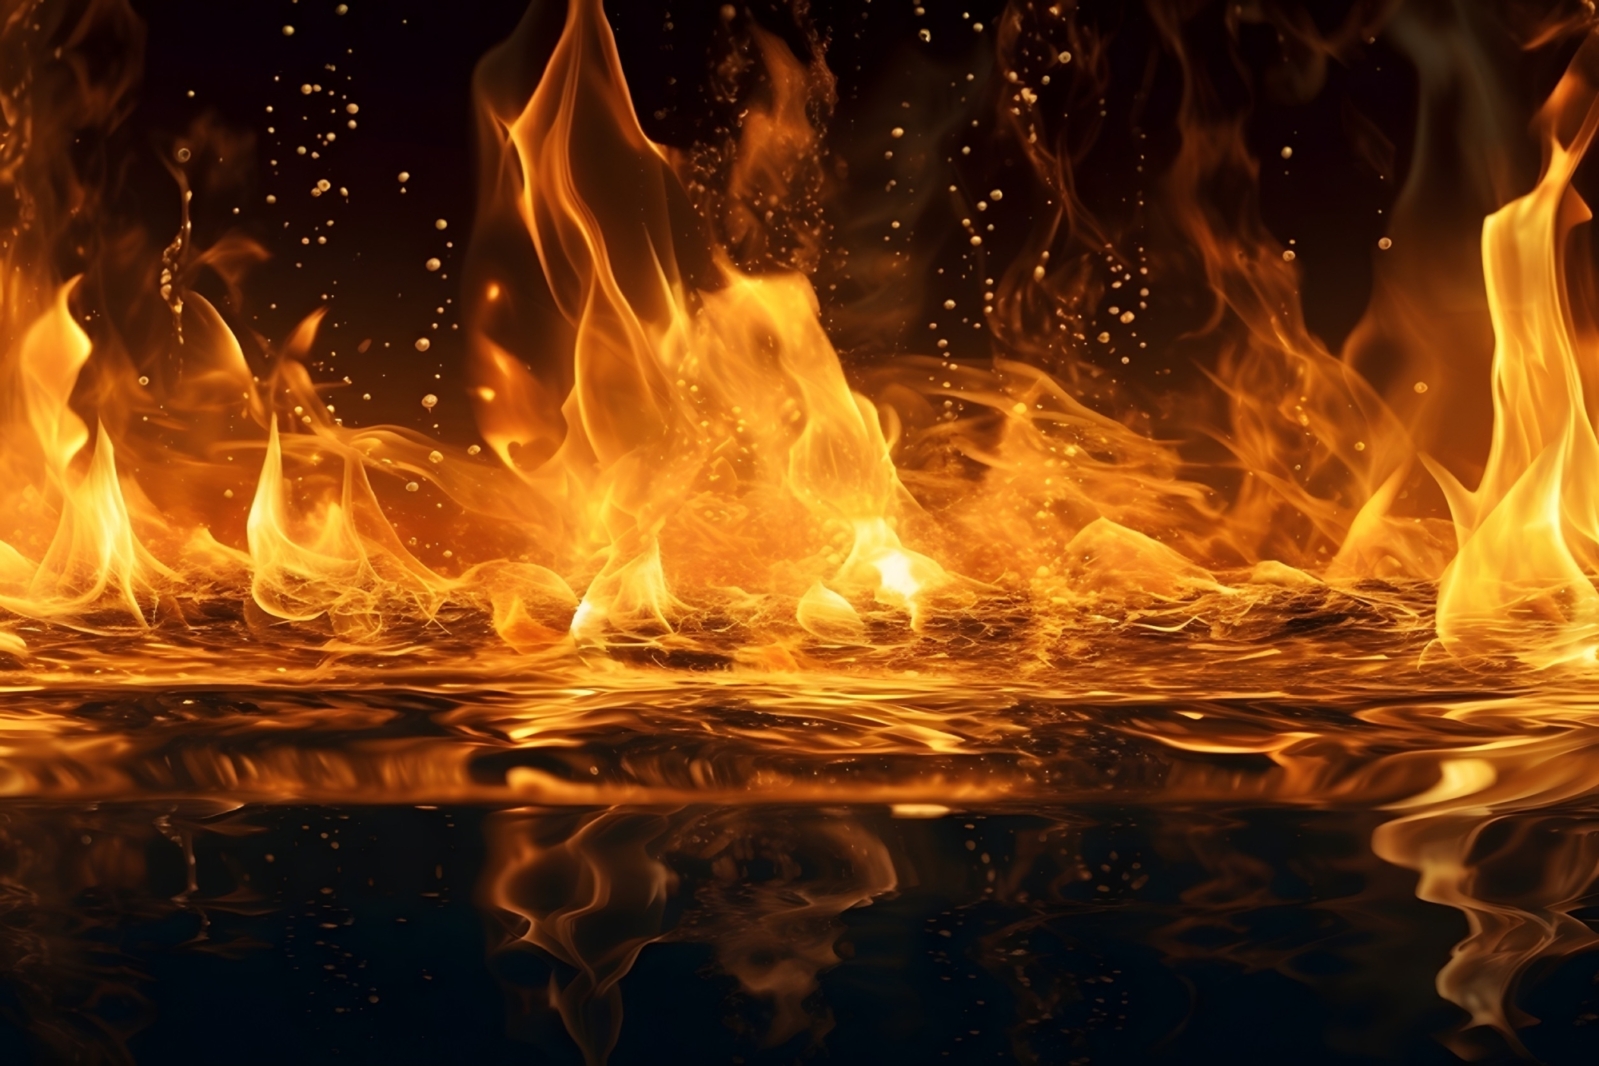 Water and Fire Damage Remediation Process Explained: Restoring Your Property After Catastrophe